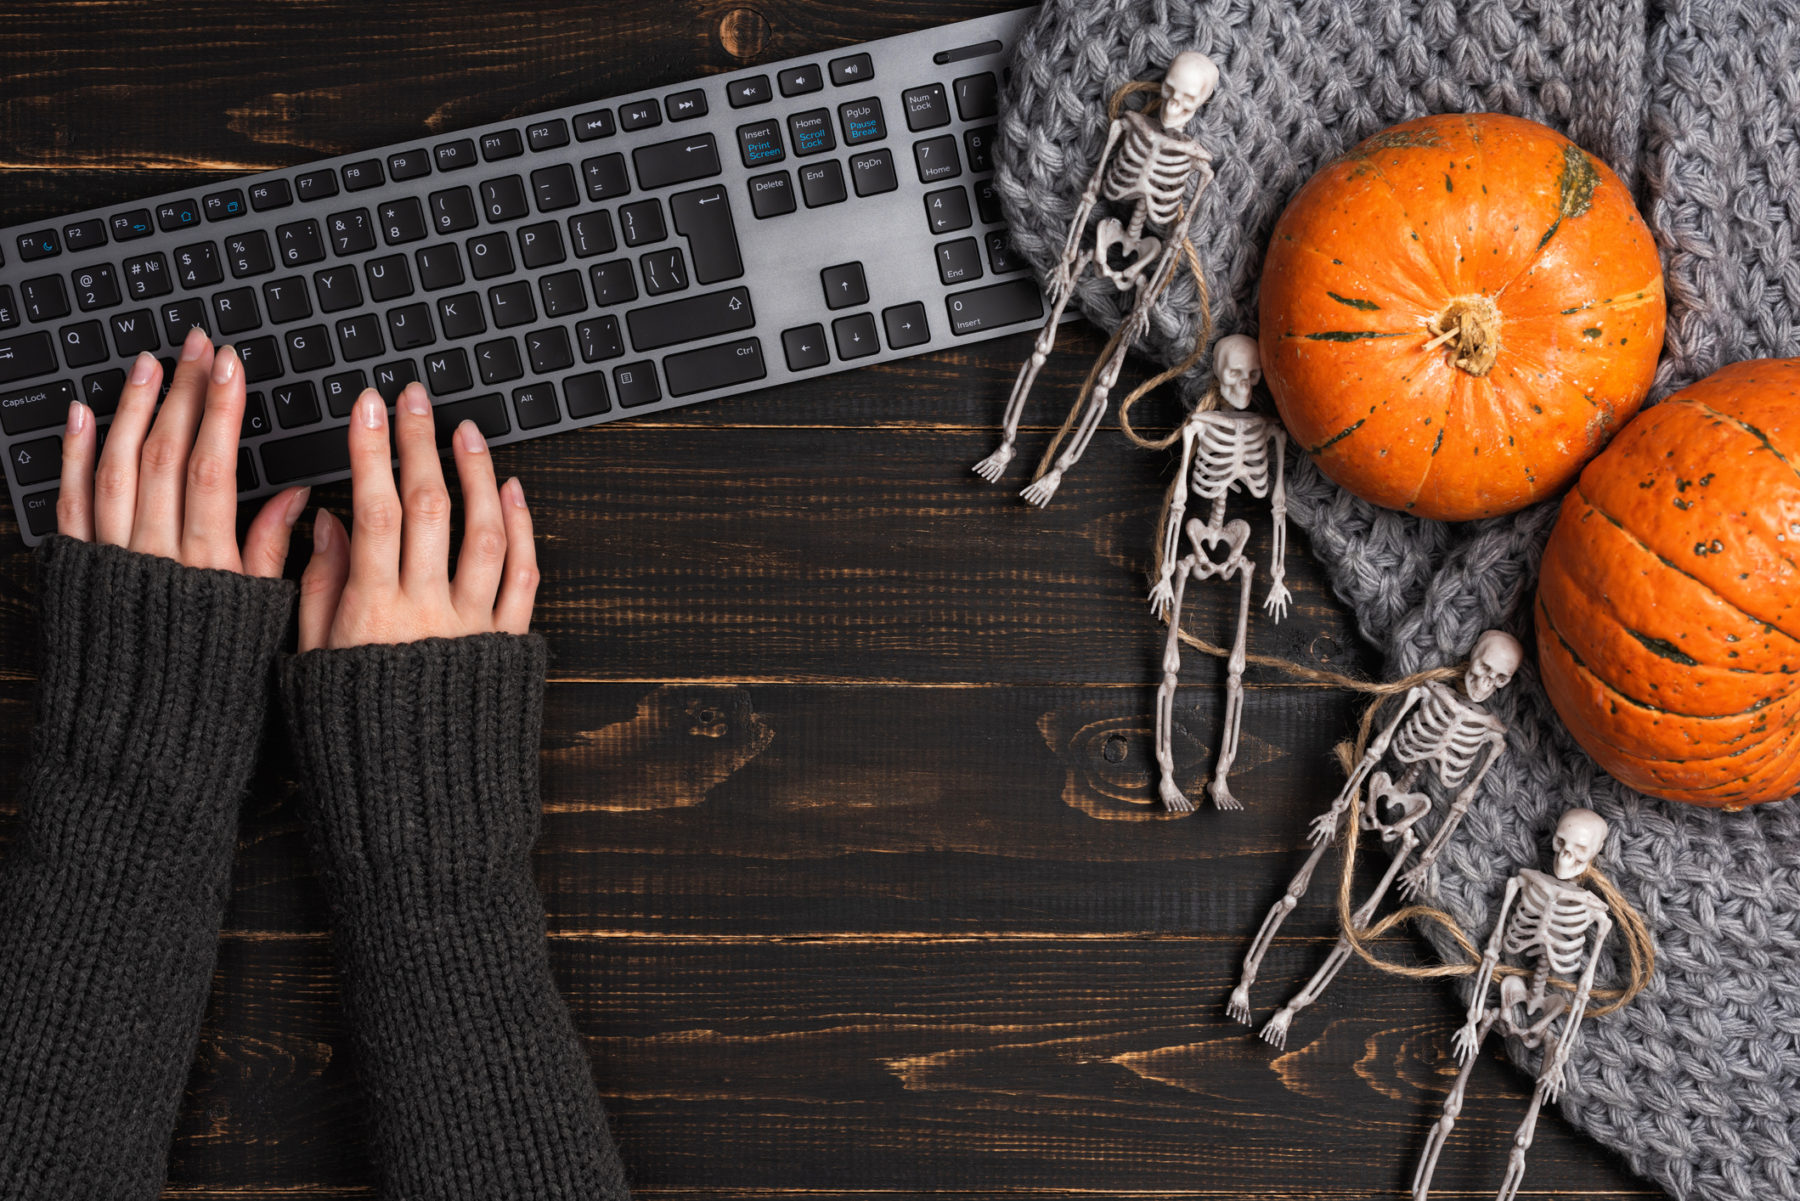 Two hands using keyboard and halloween decorations.